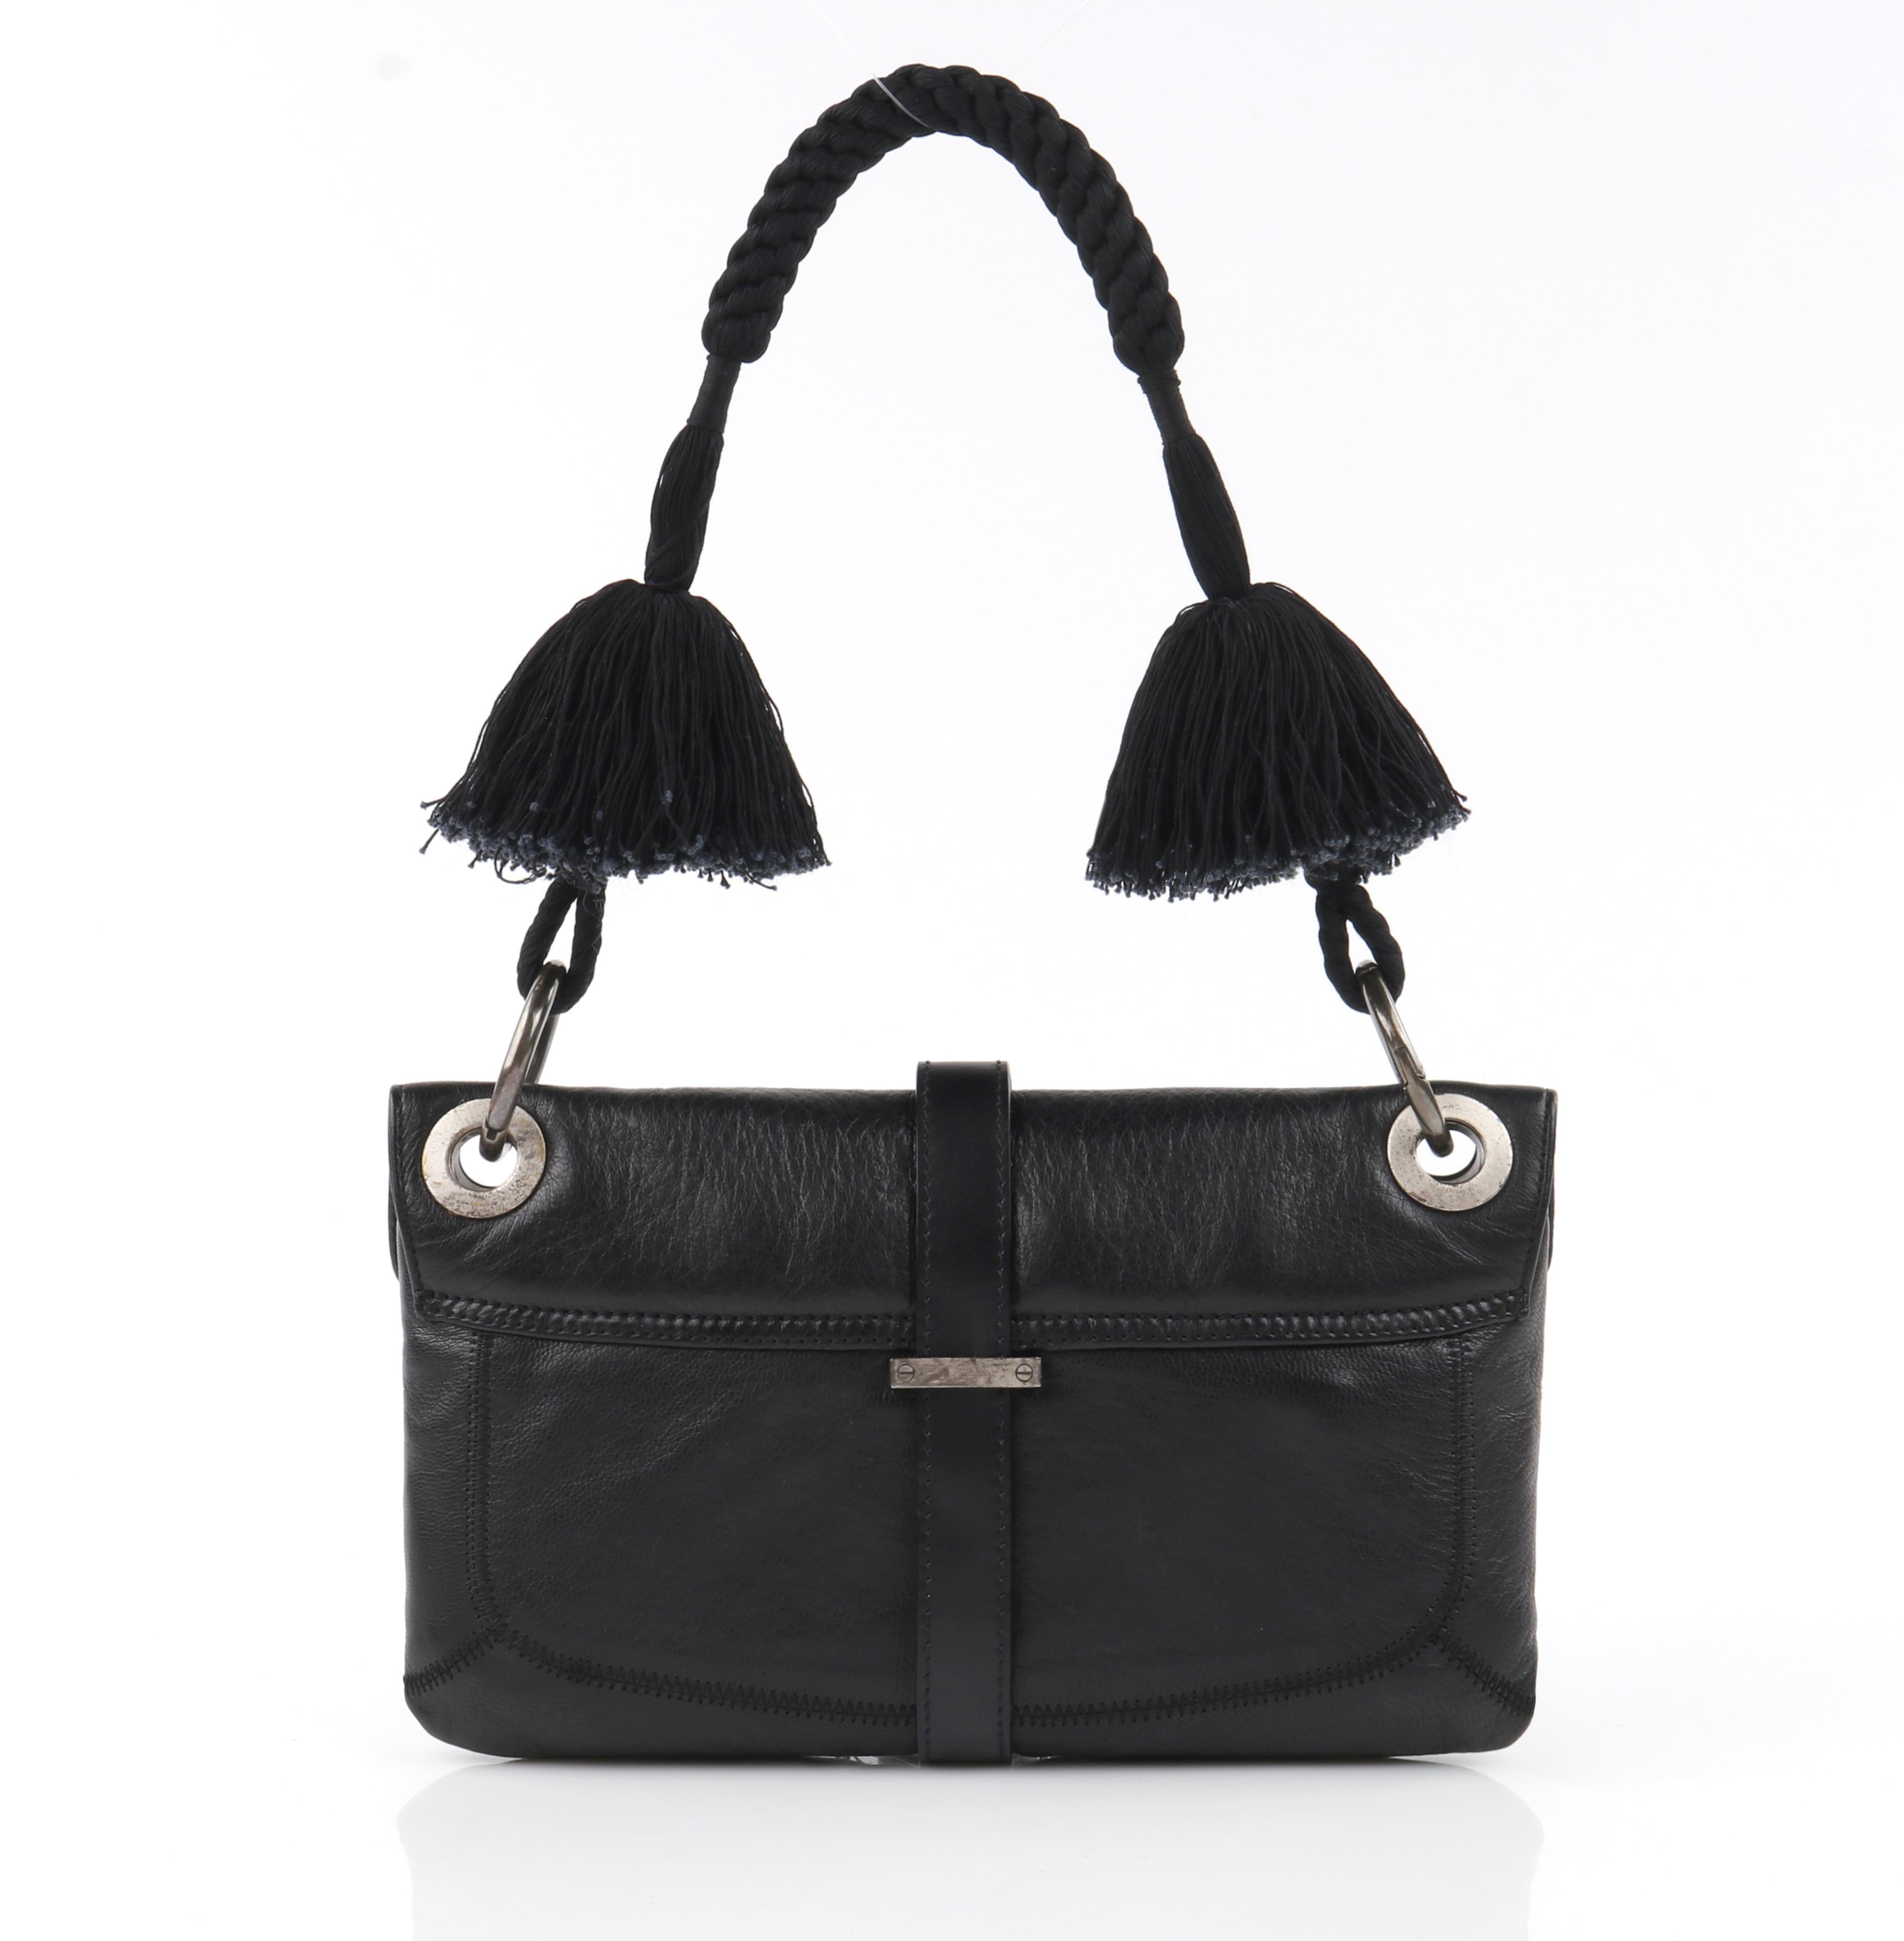 LANVIN “Jeanne” Black Leather Braided Pom Pom Tassel Strap Flap Clutch Handbag 

Brand/Manufacturer: Lanvin Paris
Style: Handbag with flap; toggle closure
Color(s): Black (fabric); silver (metal hardware)
Lined: Yes
Unmarked Fabric Content (feel